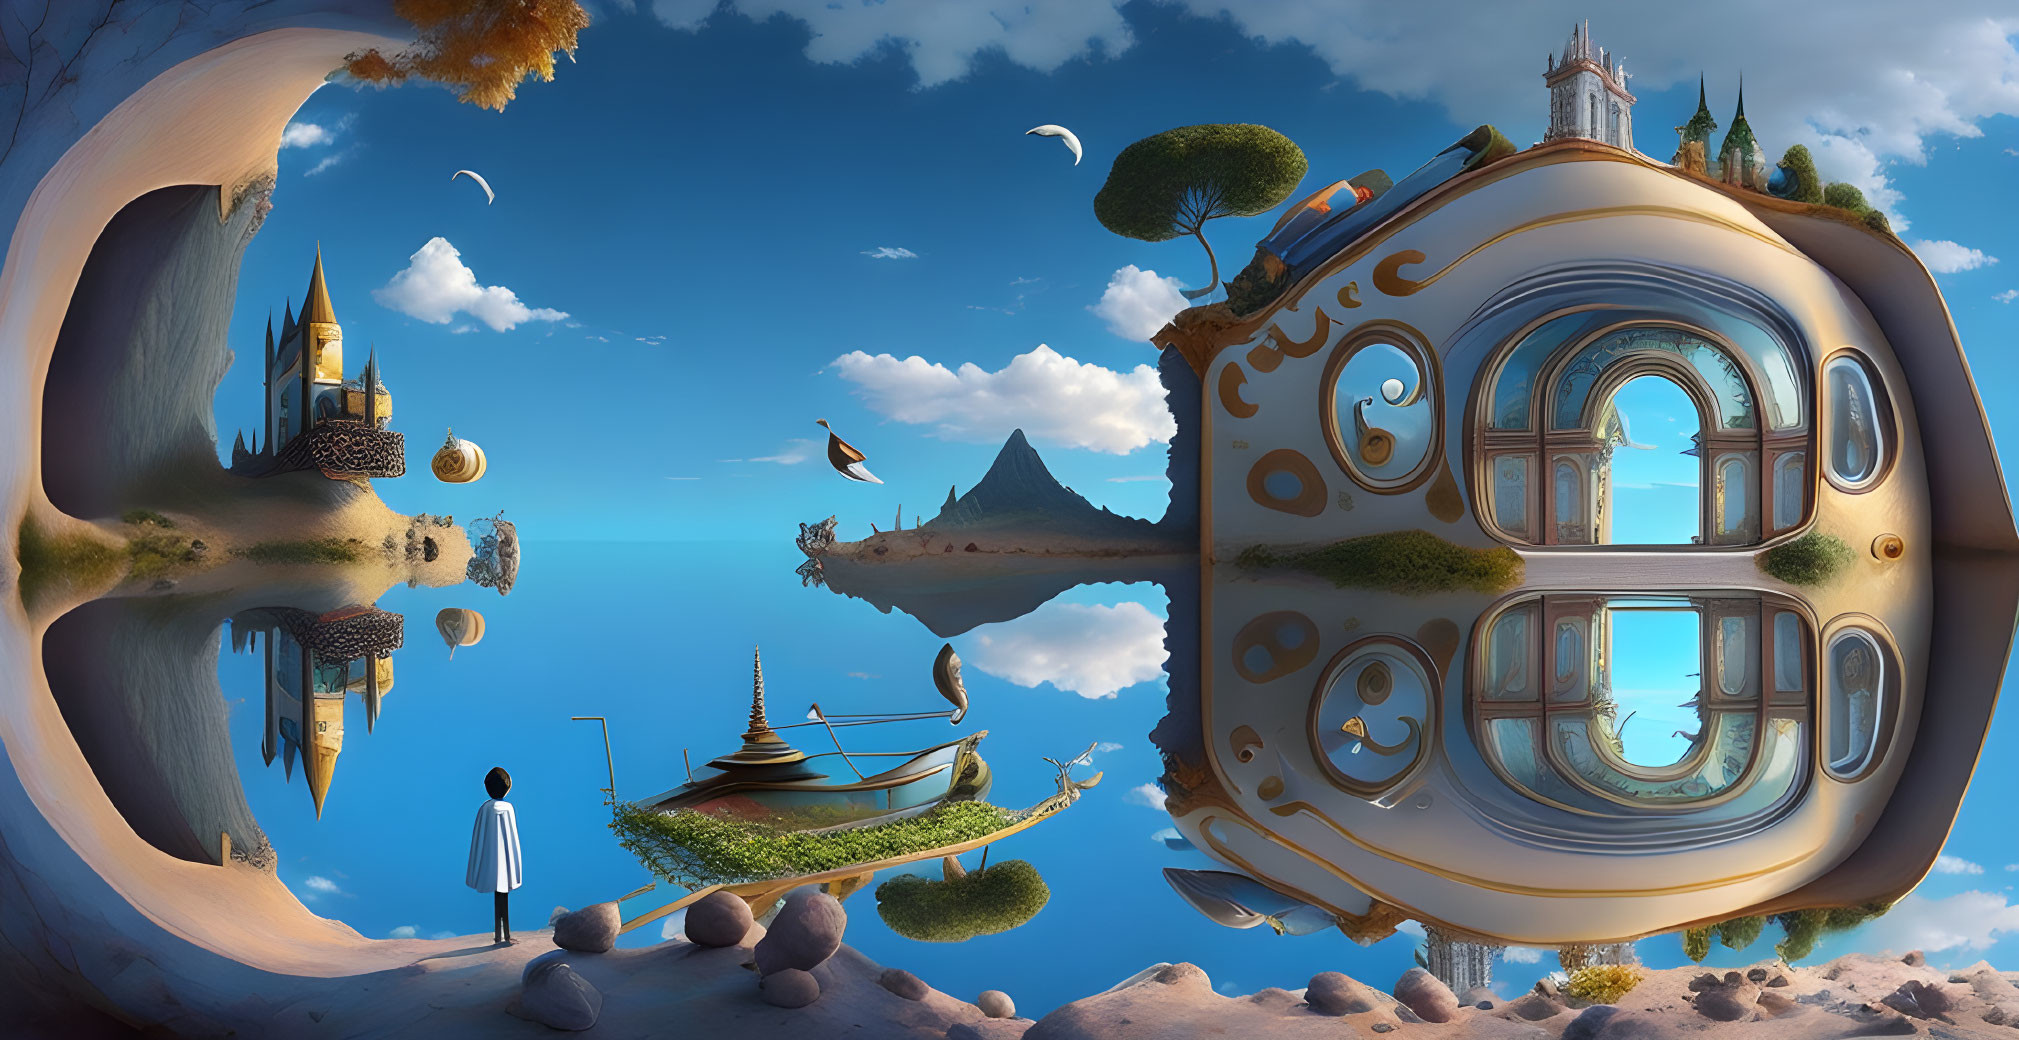 Surreal panorama with floating islands and whimsical architecture